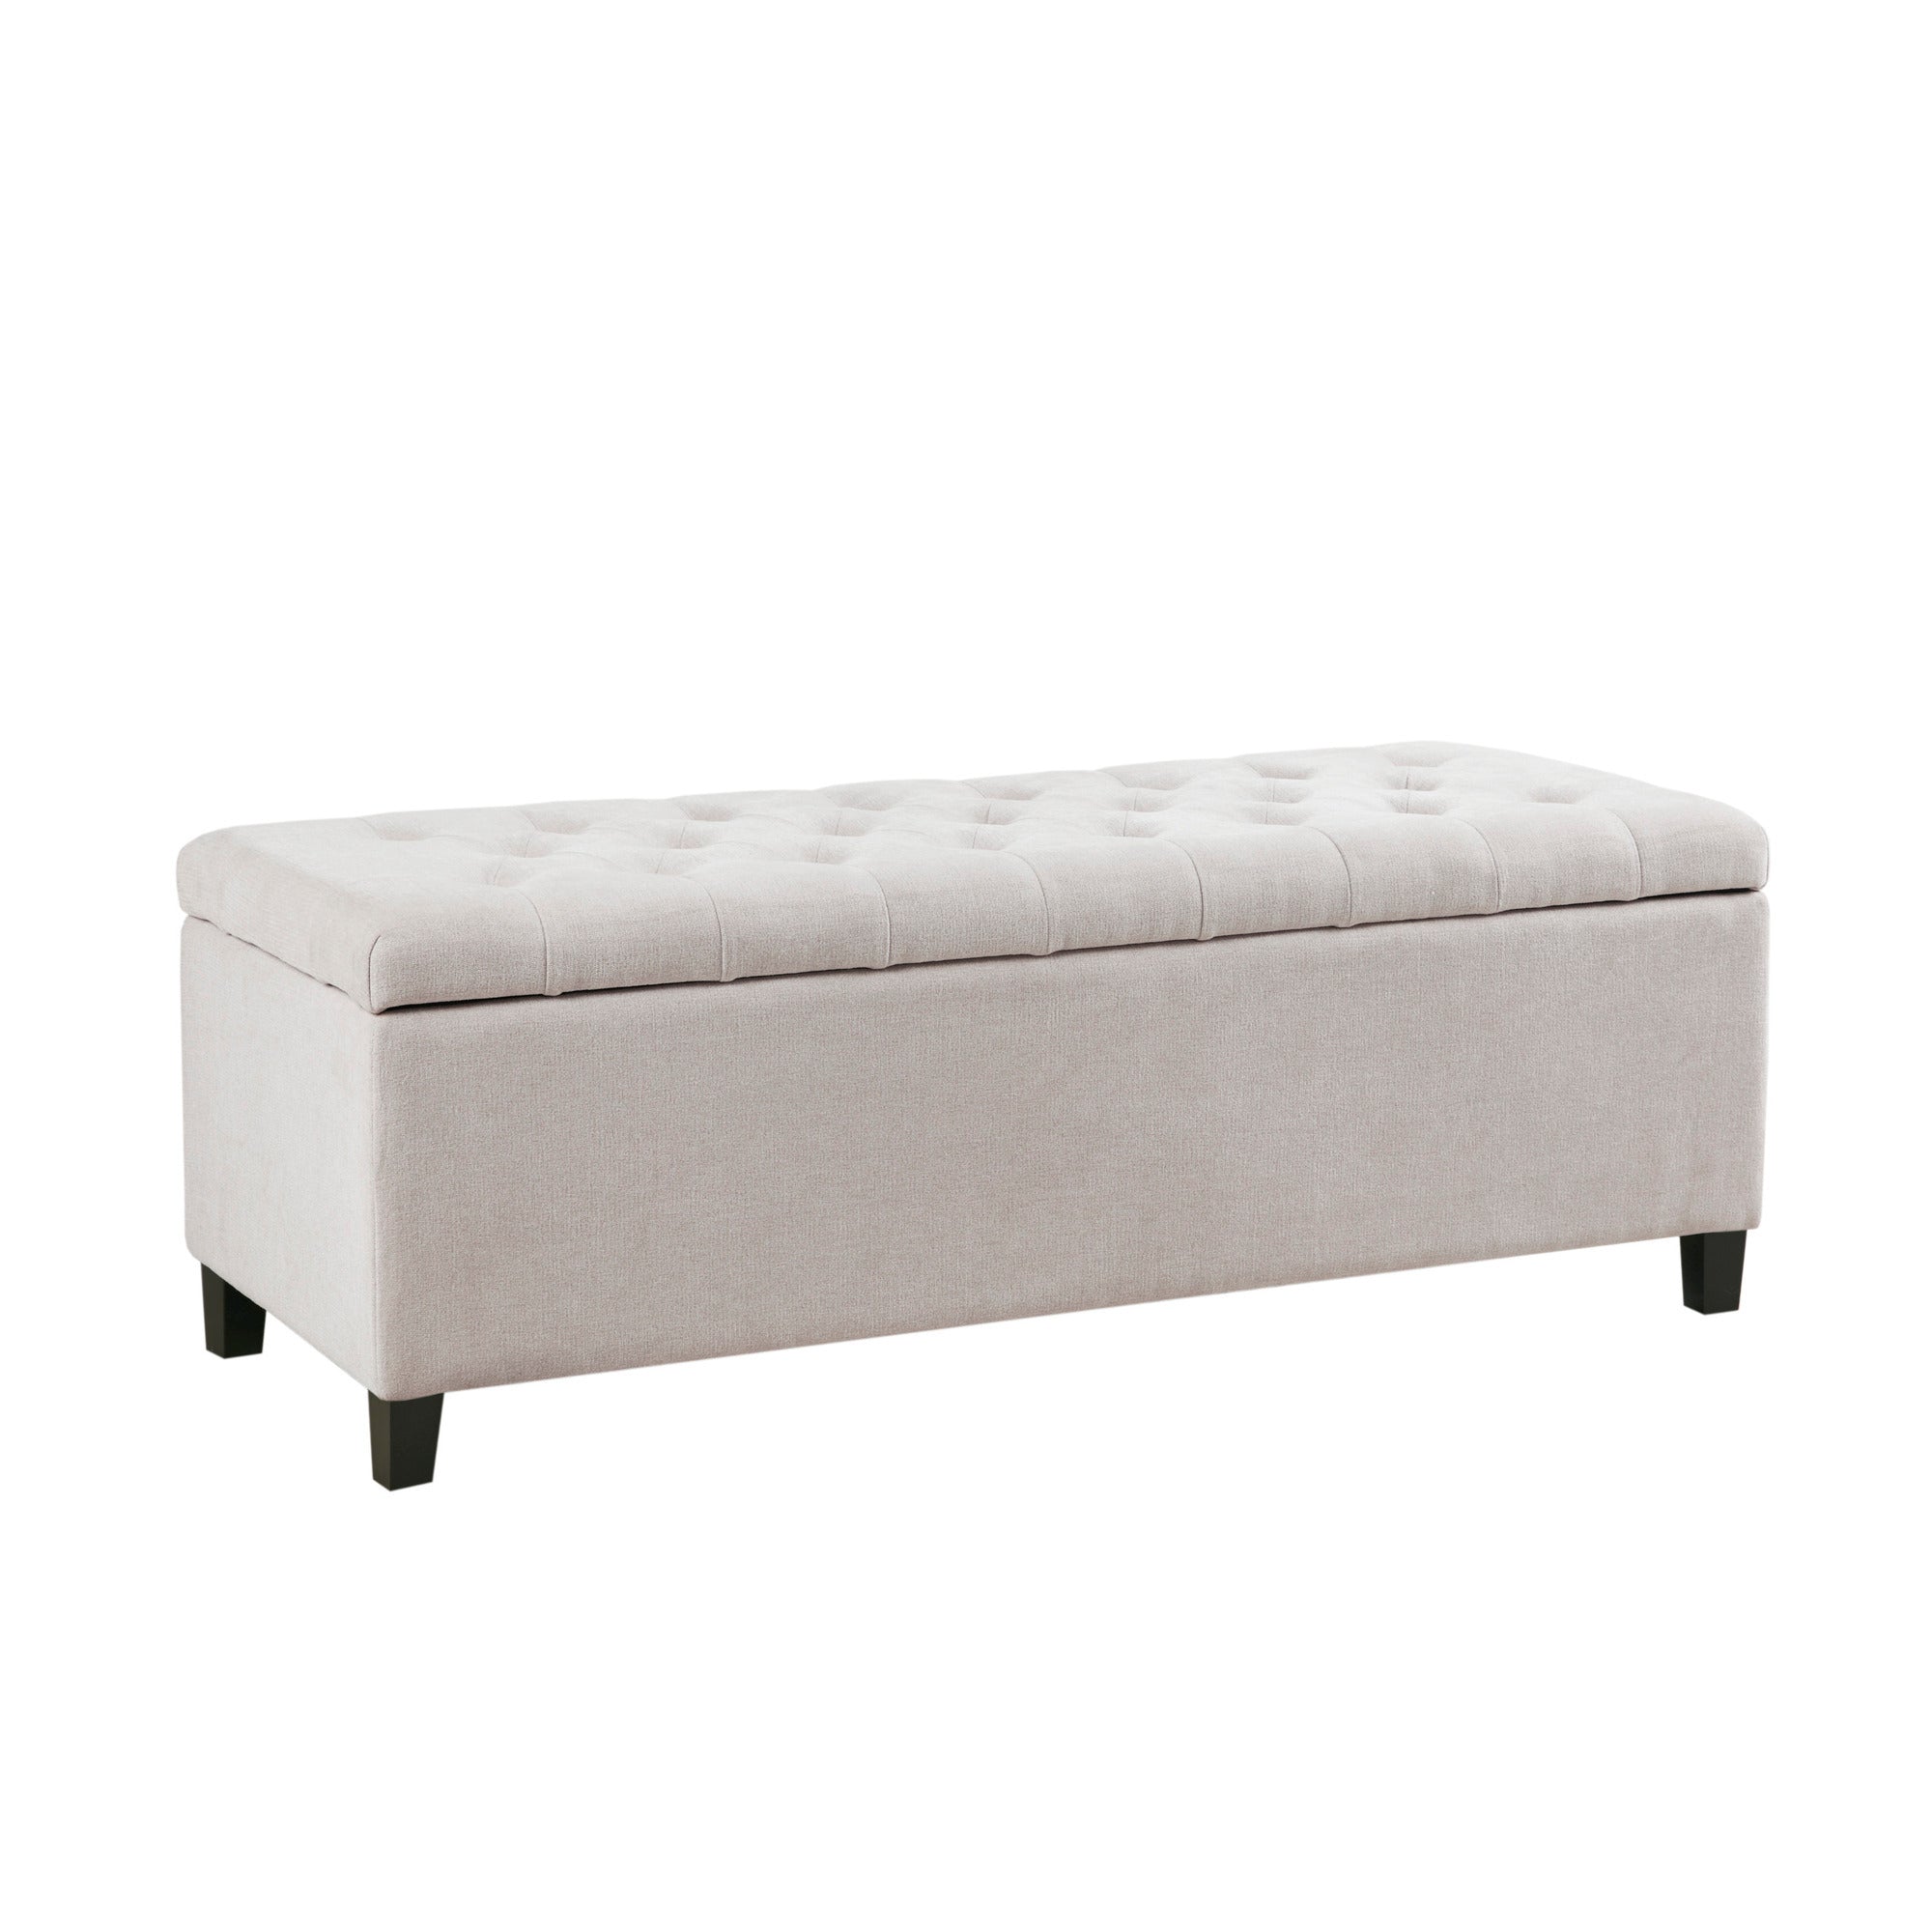 NOBLEMOOD Tufted Top End of Bed Storage Bench for Bedroom, Sofa Ottoman with Storage and Wood Legs for Living Room, White